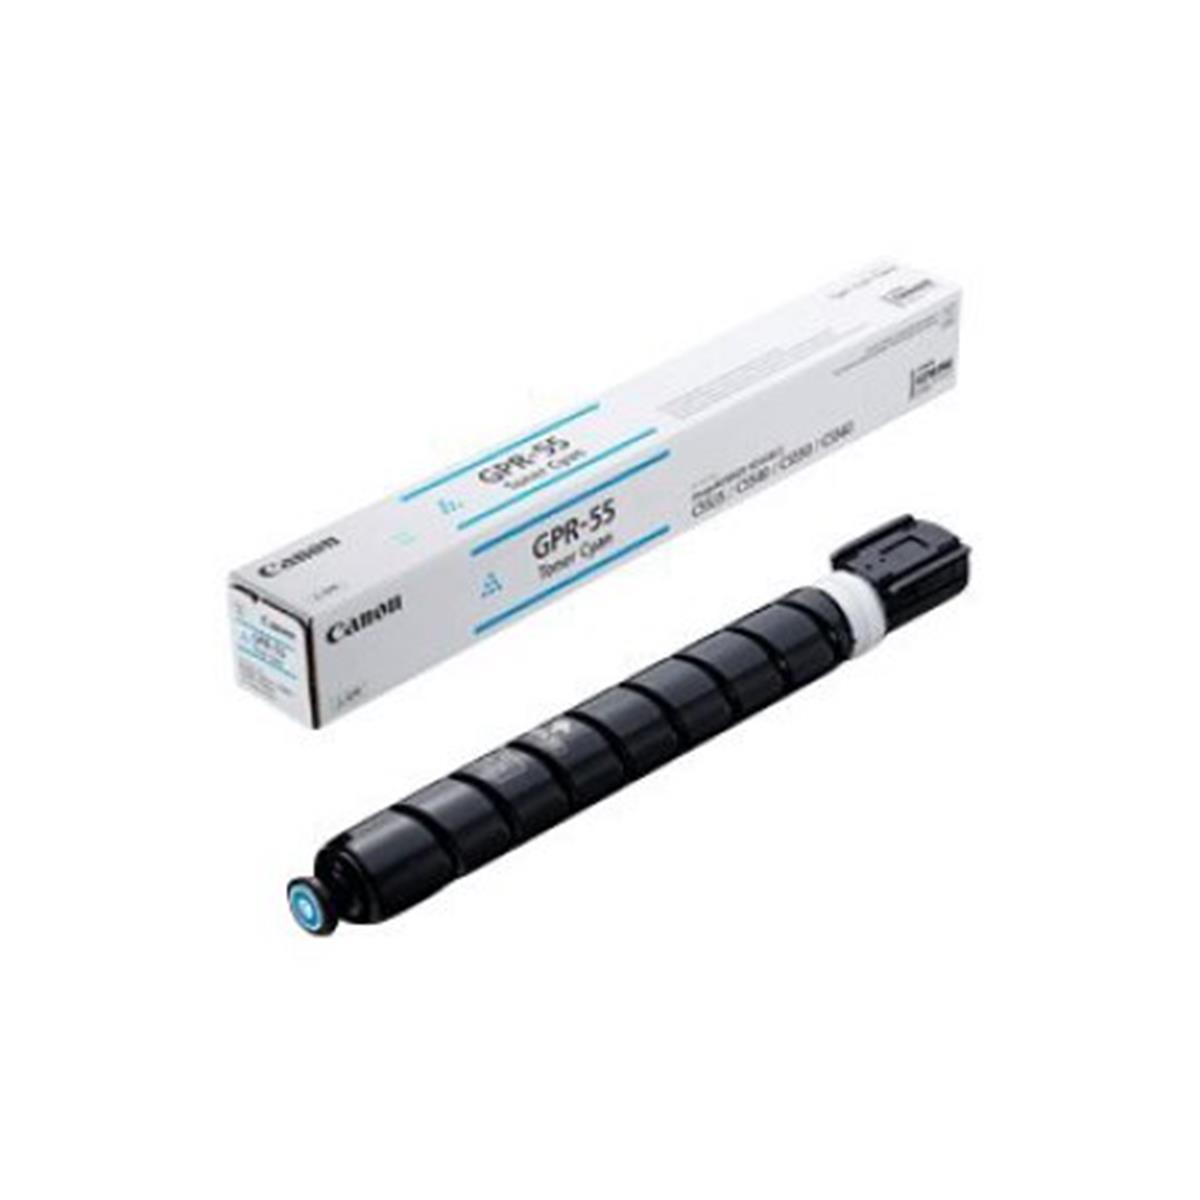 Picture of Canon CNM0485C003 Imagerunner C5535I - Gpr55L SD Cyan Toner Cartridges